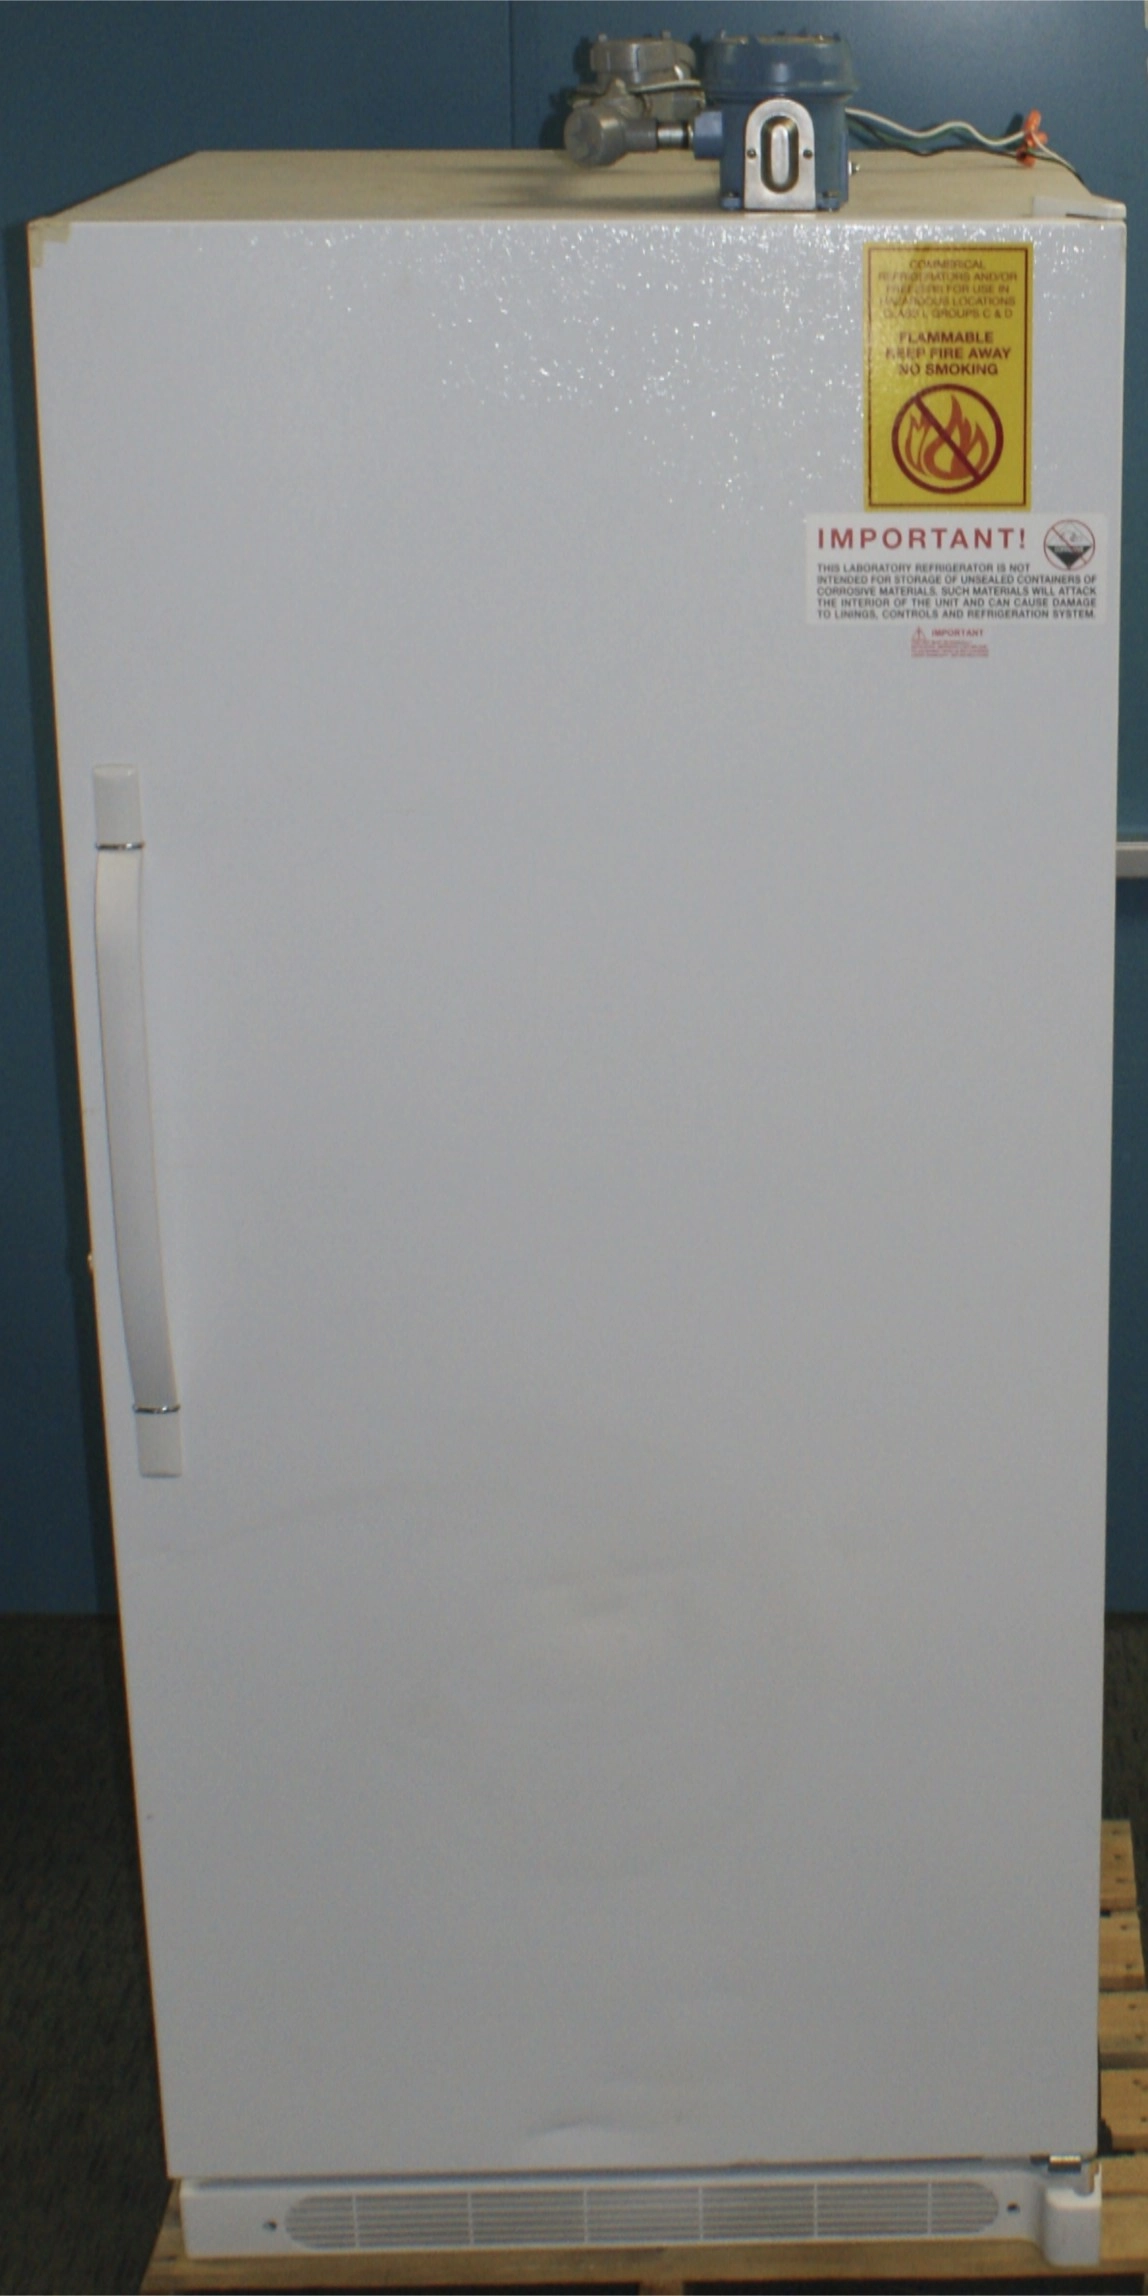 Flammable Storage Refrigerator Explosion proof Refrigerators also available Flammable Storage Freezer Explosion Proof Freezer